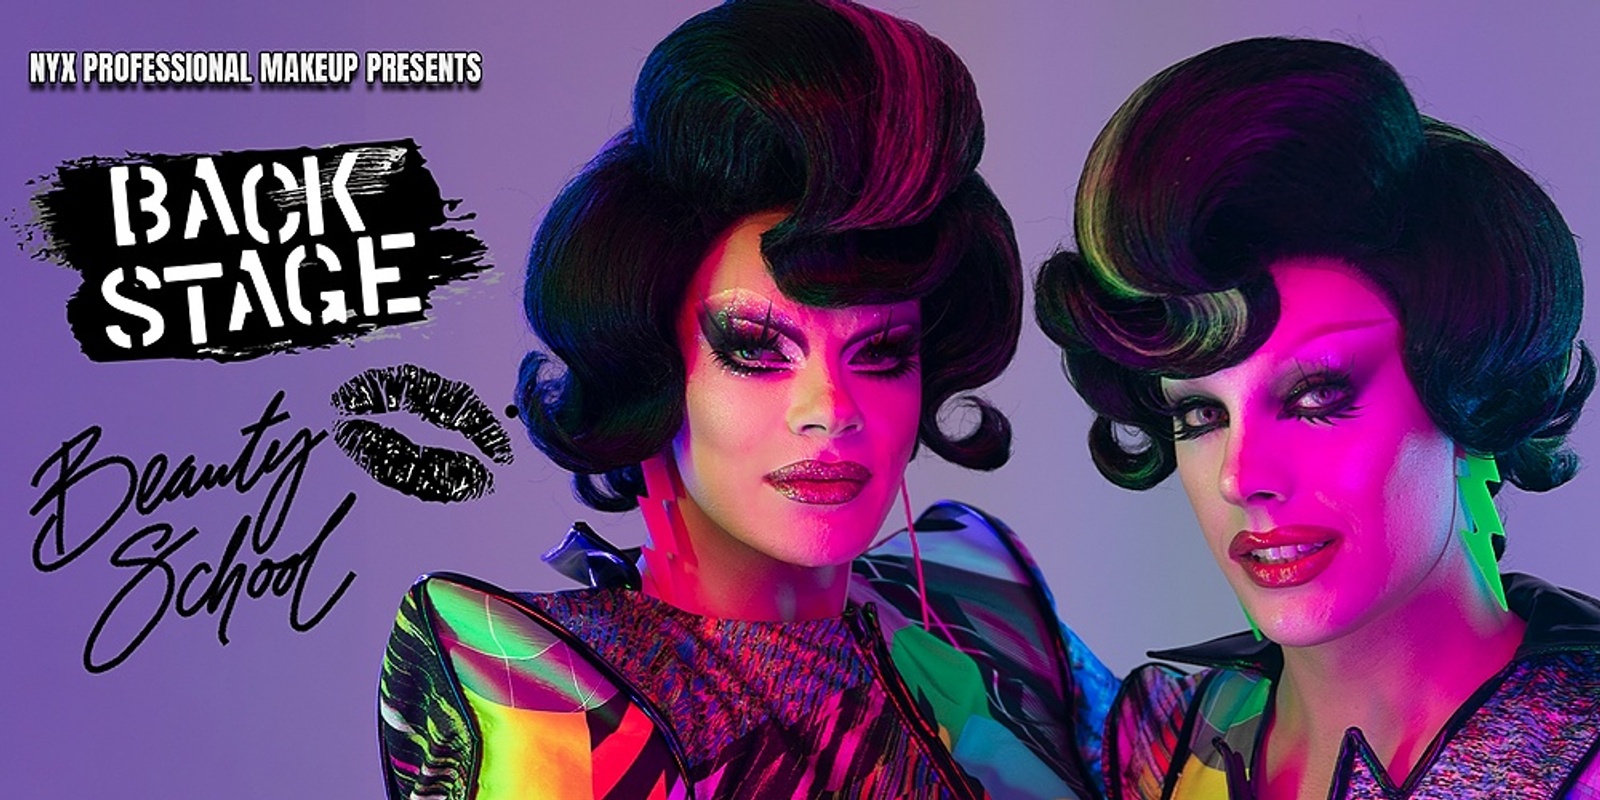 Banner image for Backstage Beauty School Newcastle Presented by NYX Professional Makeup